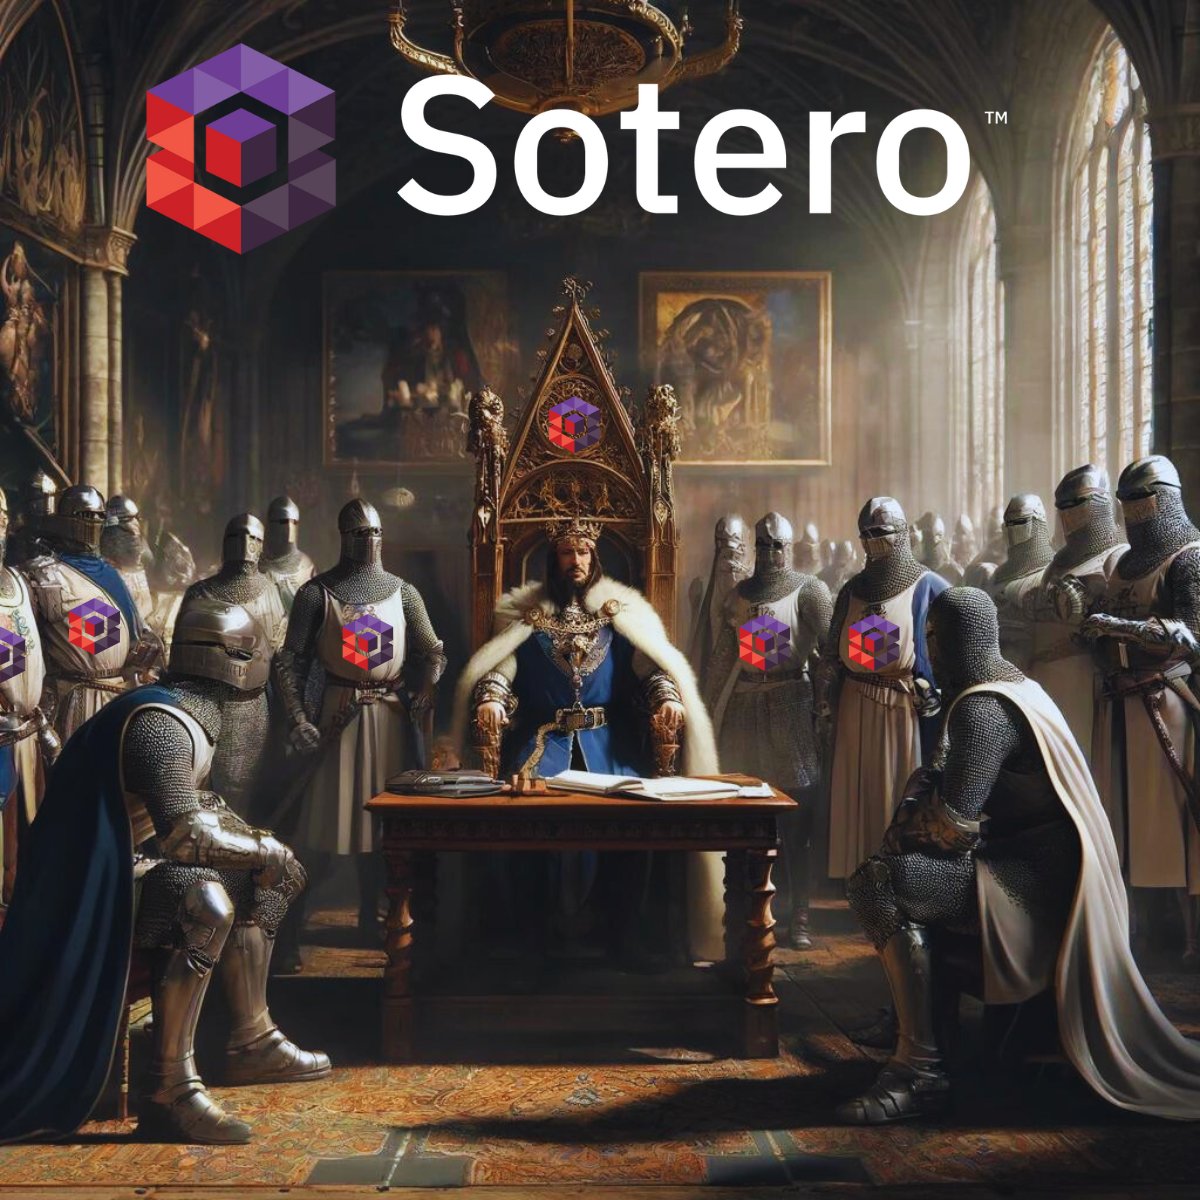 Sotero is to your data what knights were to a kingdom: protectors. No matter the cyber onslaught, your assets remain shielded under our watch. Modern knights for digital realms.

bit.ly/49vdmec
#ransomwaresolution #ransomwareprevention